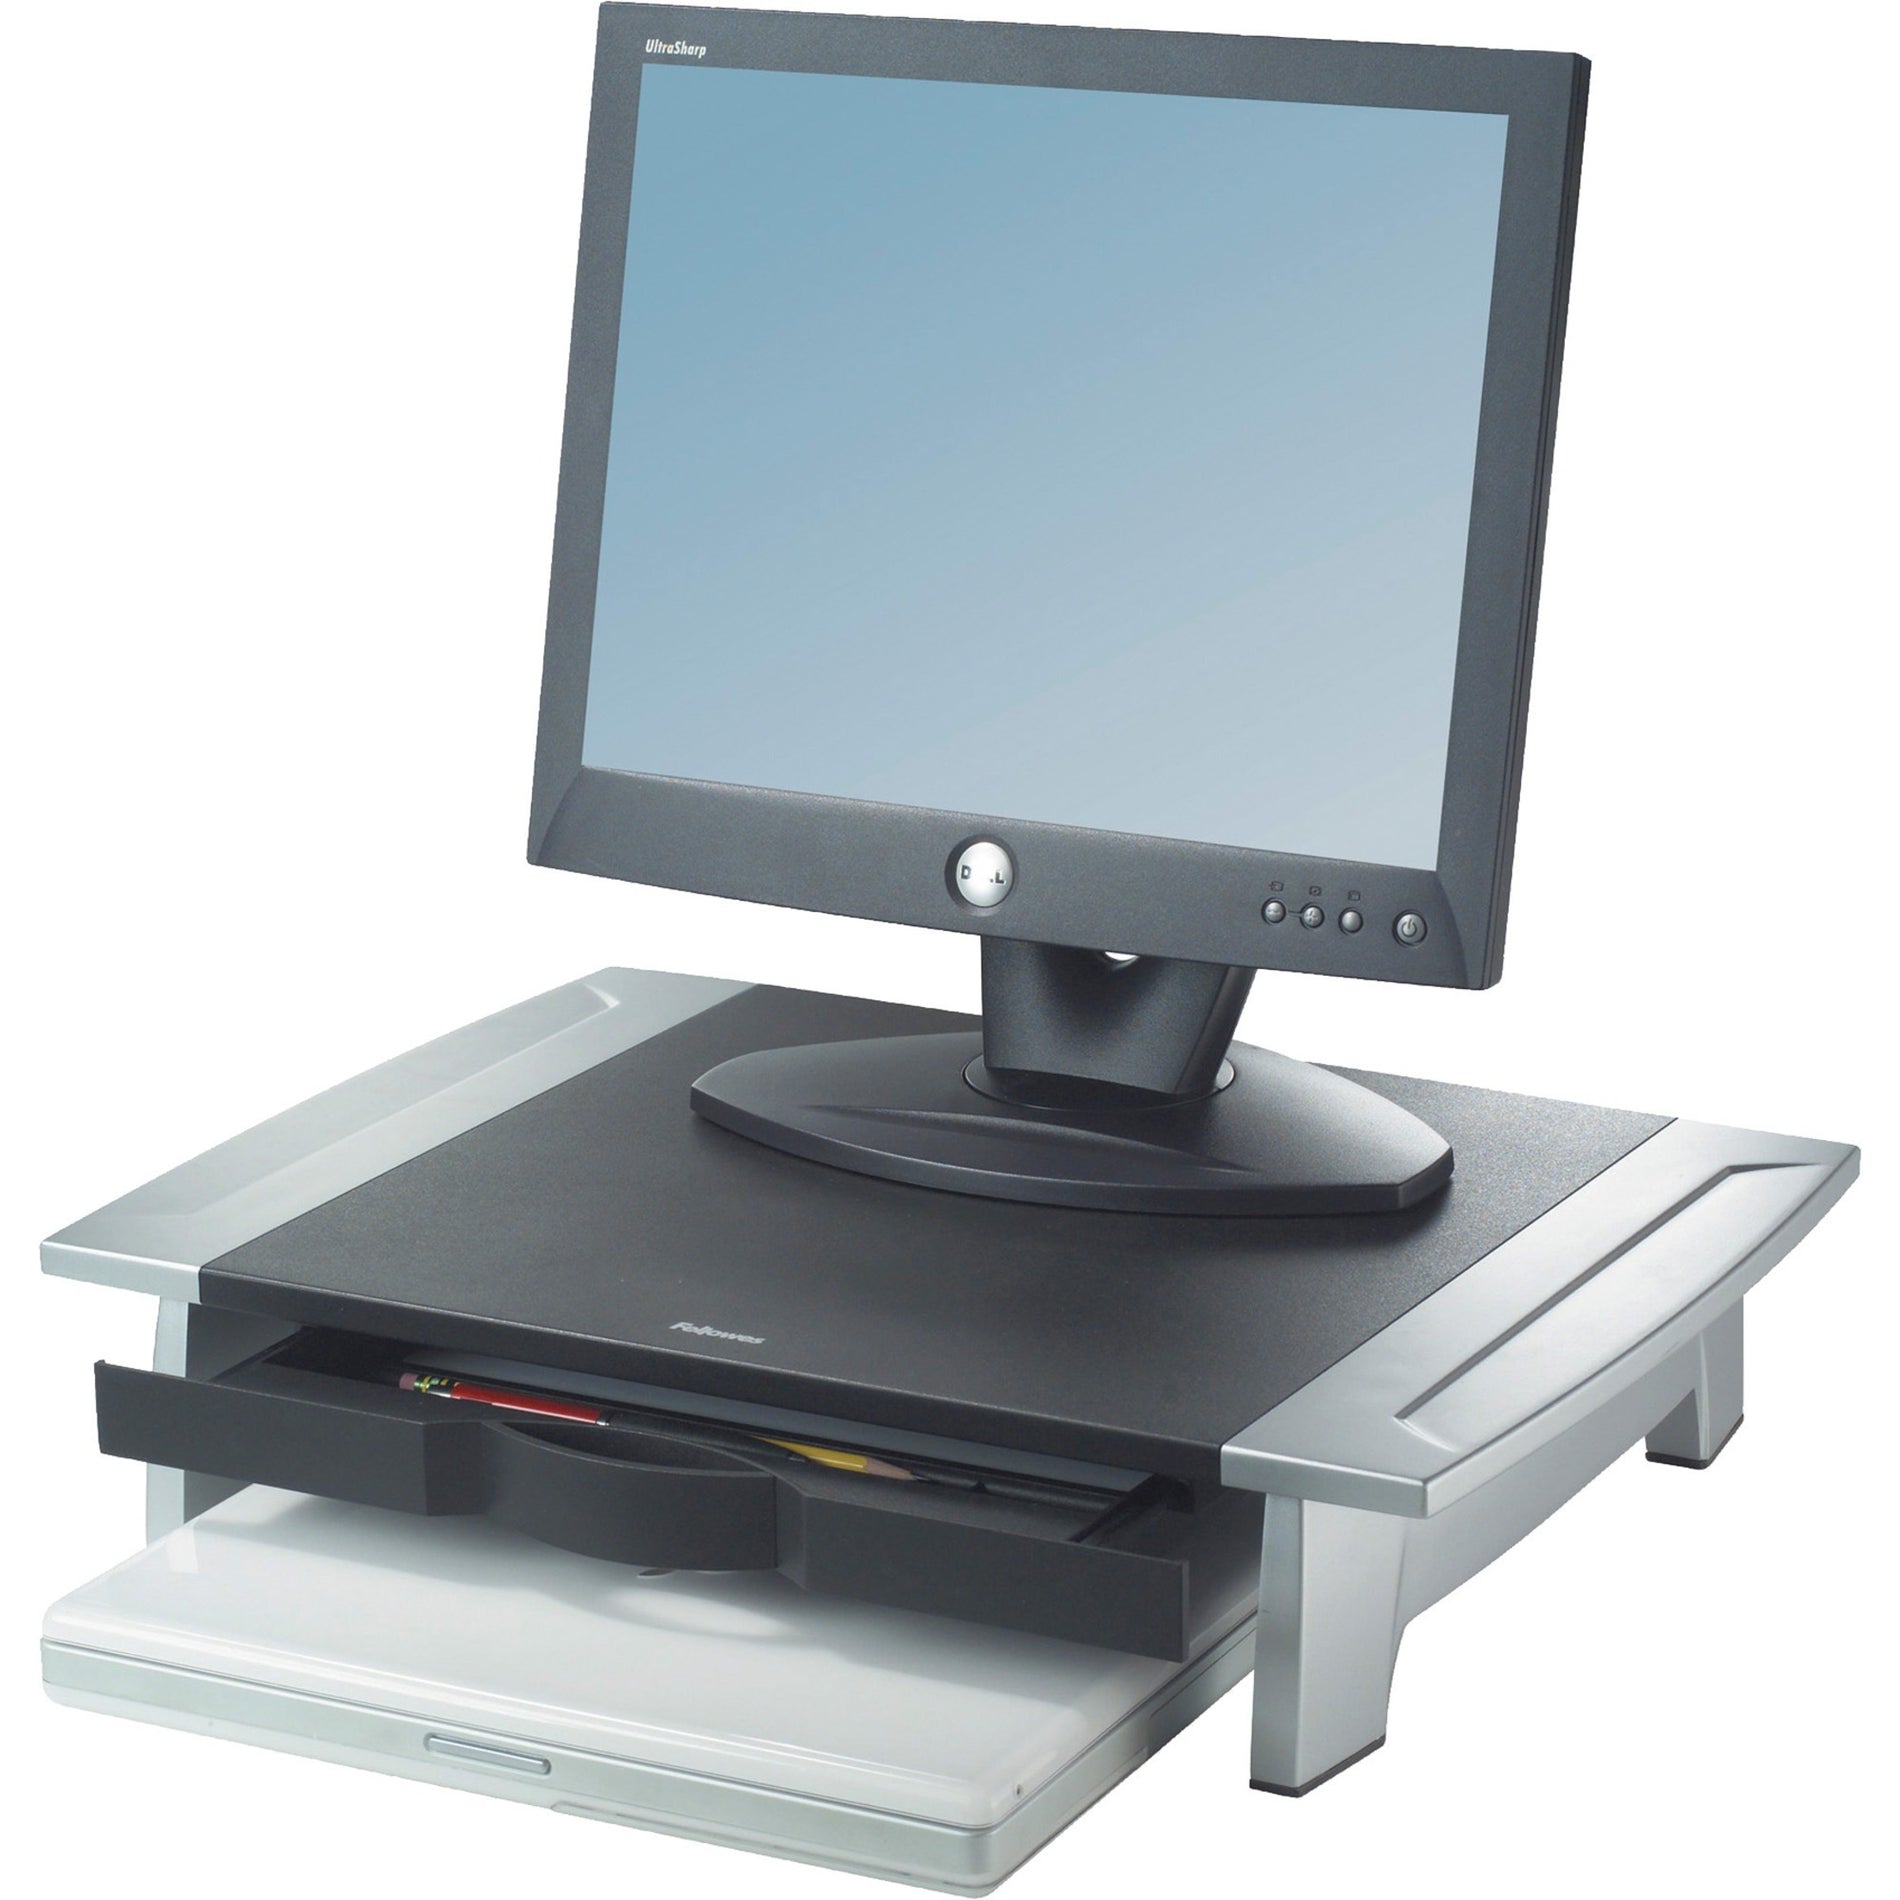 Fellowes 8031101 Office Suites Monitor Riser, Ergonomic Stand for Comfortable Viewing and Space Saving